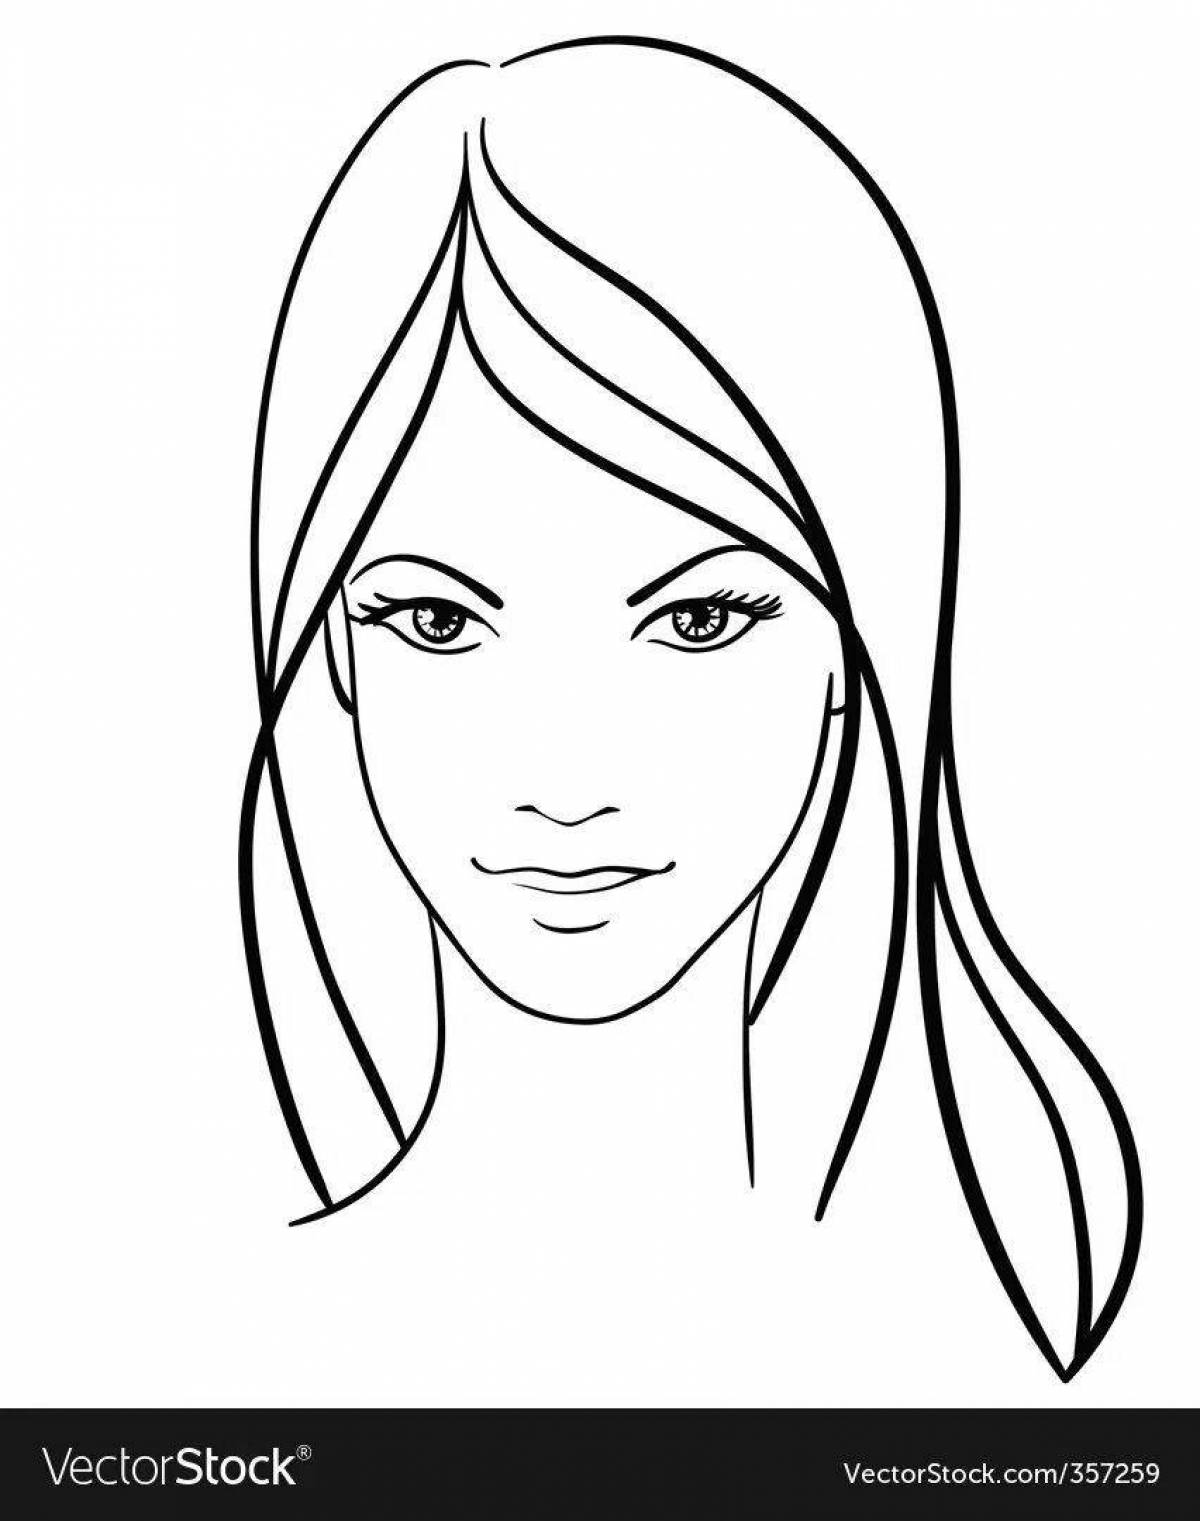 Cute female face coloring page for kids